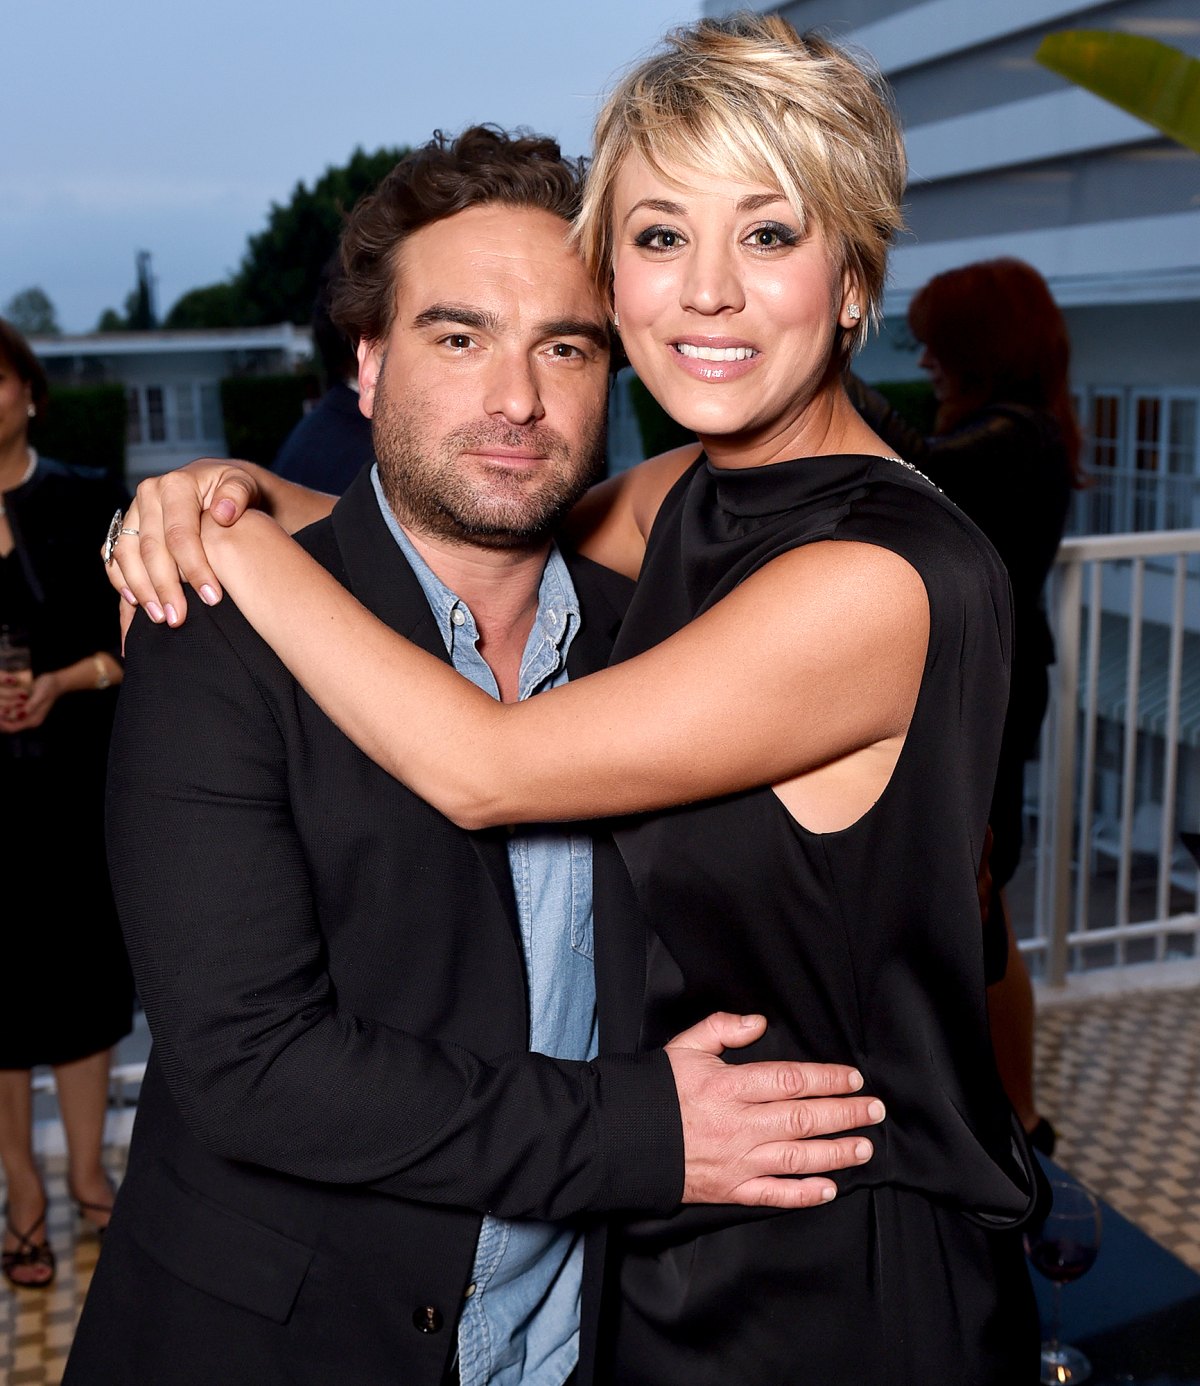 Kayley Cuoco - Kaley Cuoco and Ex Johnny Galecki's Friendship Through the Years